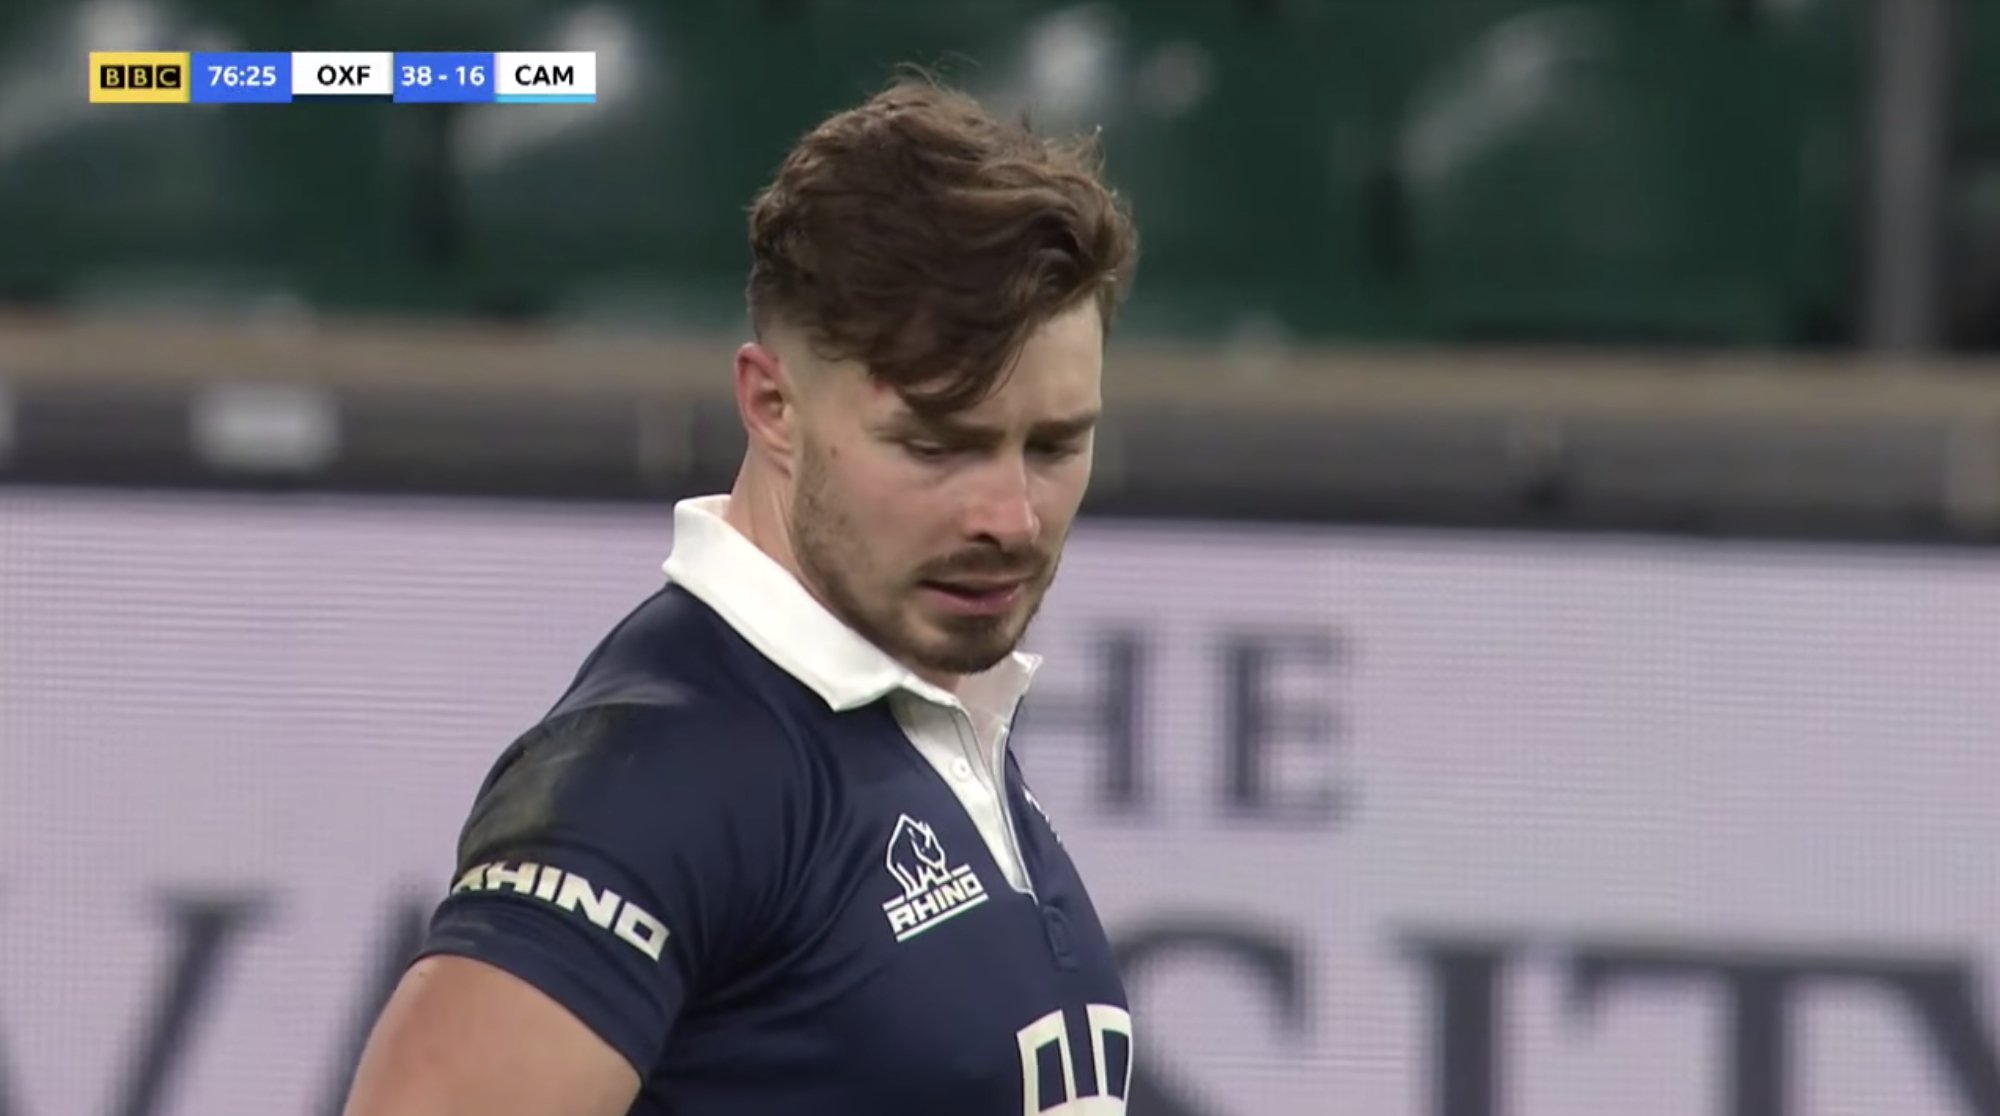 WATCH: Former Saracens player is on another level as he HUMILIATES Cambridge in Varsity match